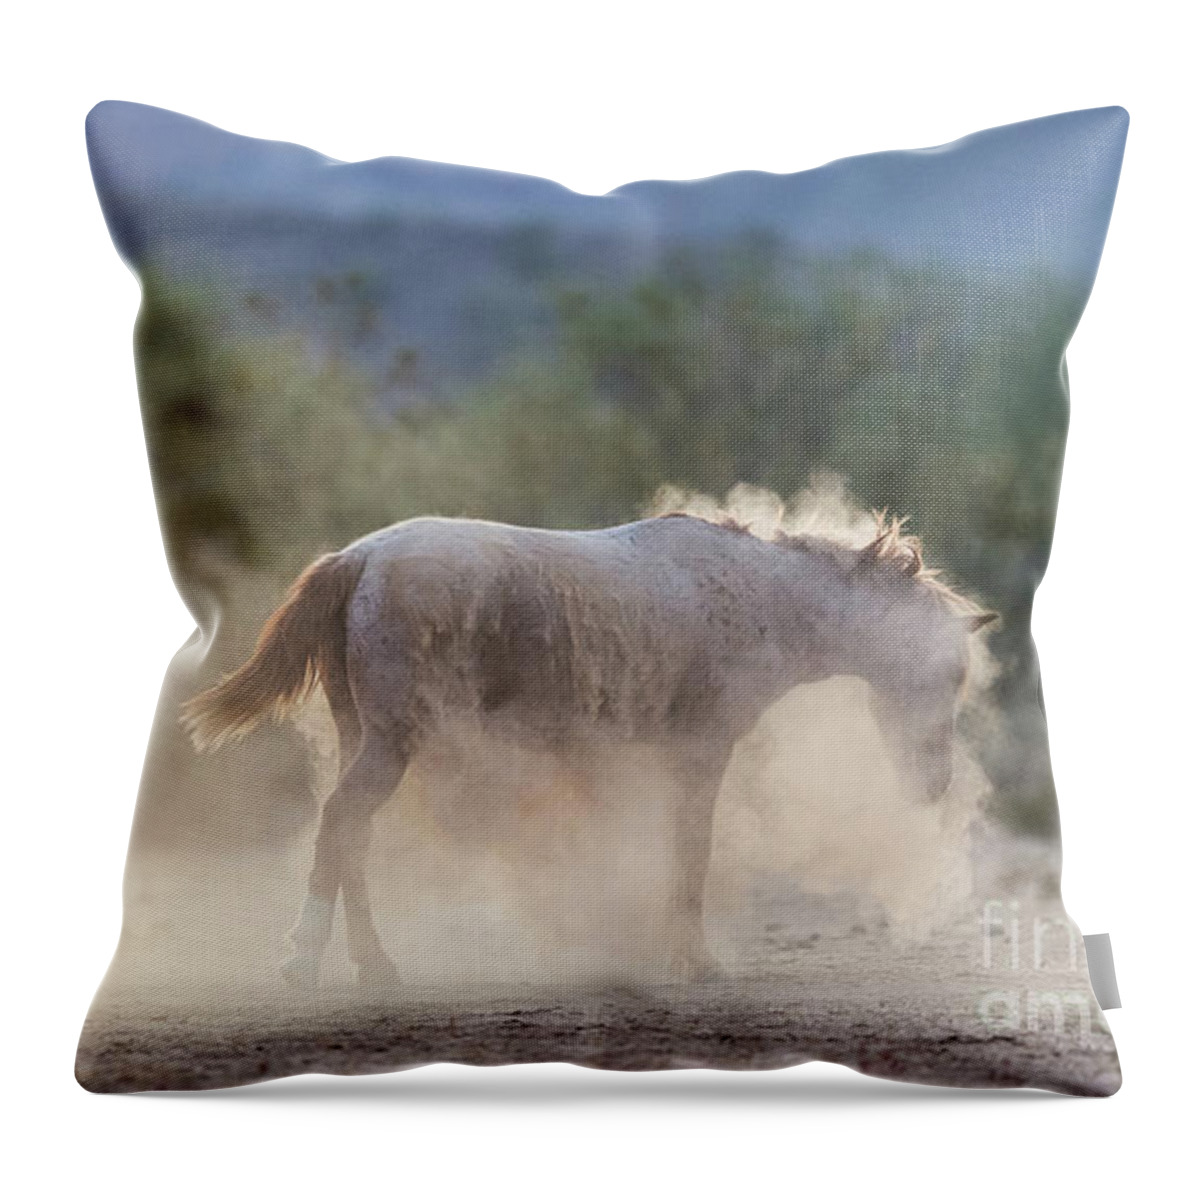 Shaking Off Dirt Throw Pillow featuring the photograph Dust Bath by Shannon Hastings